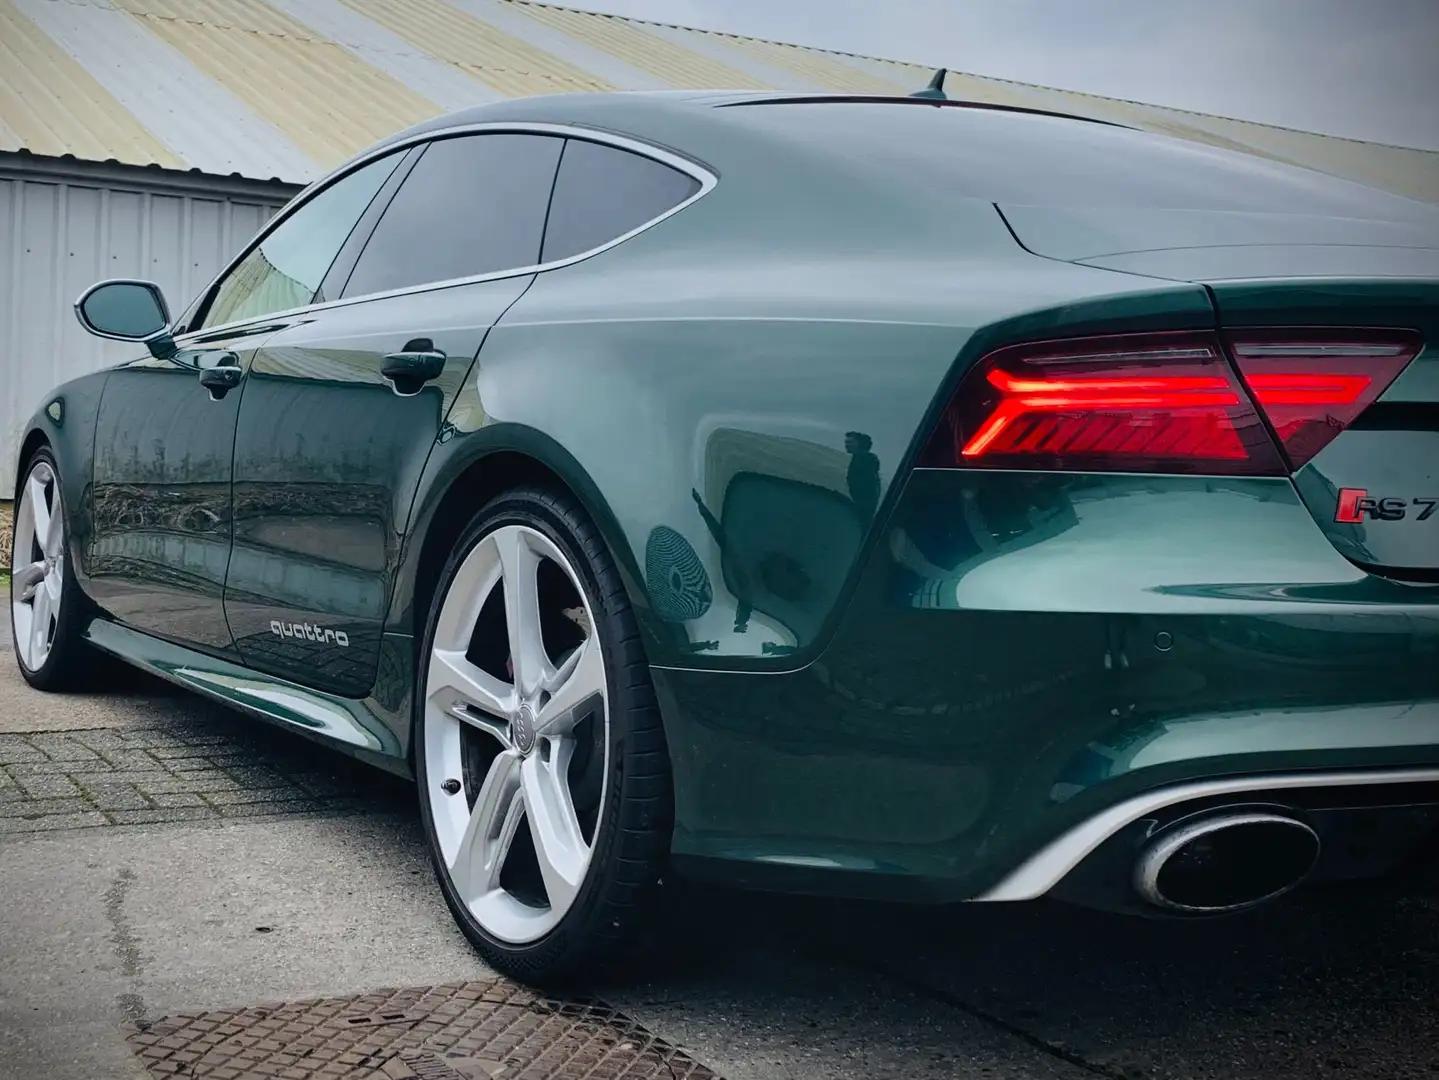 Audi RS7 Verdant Green - Audi Exclusive - from collector Grün - 2